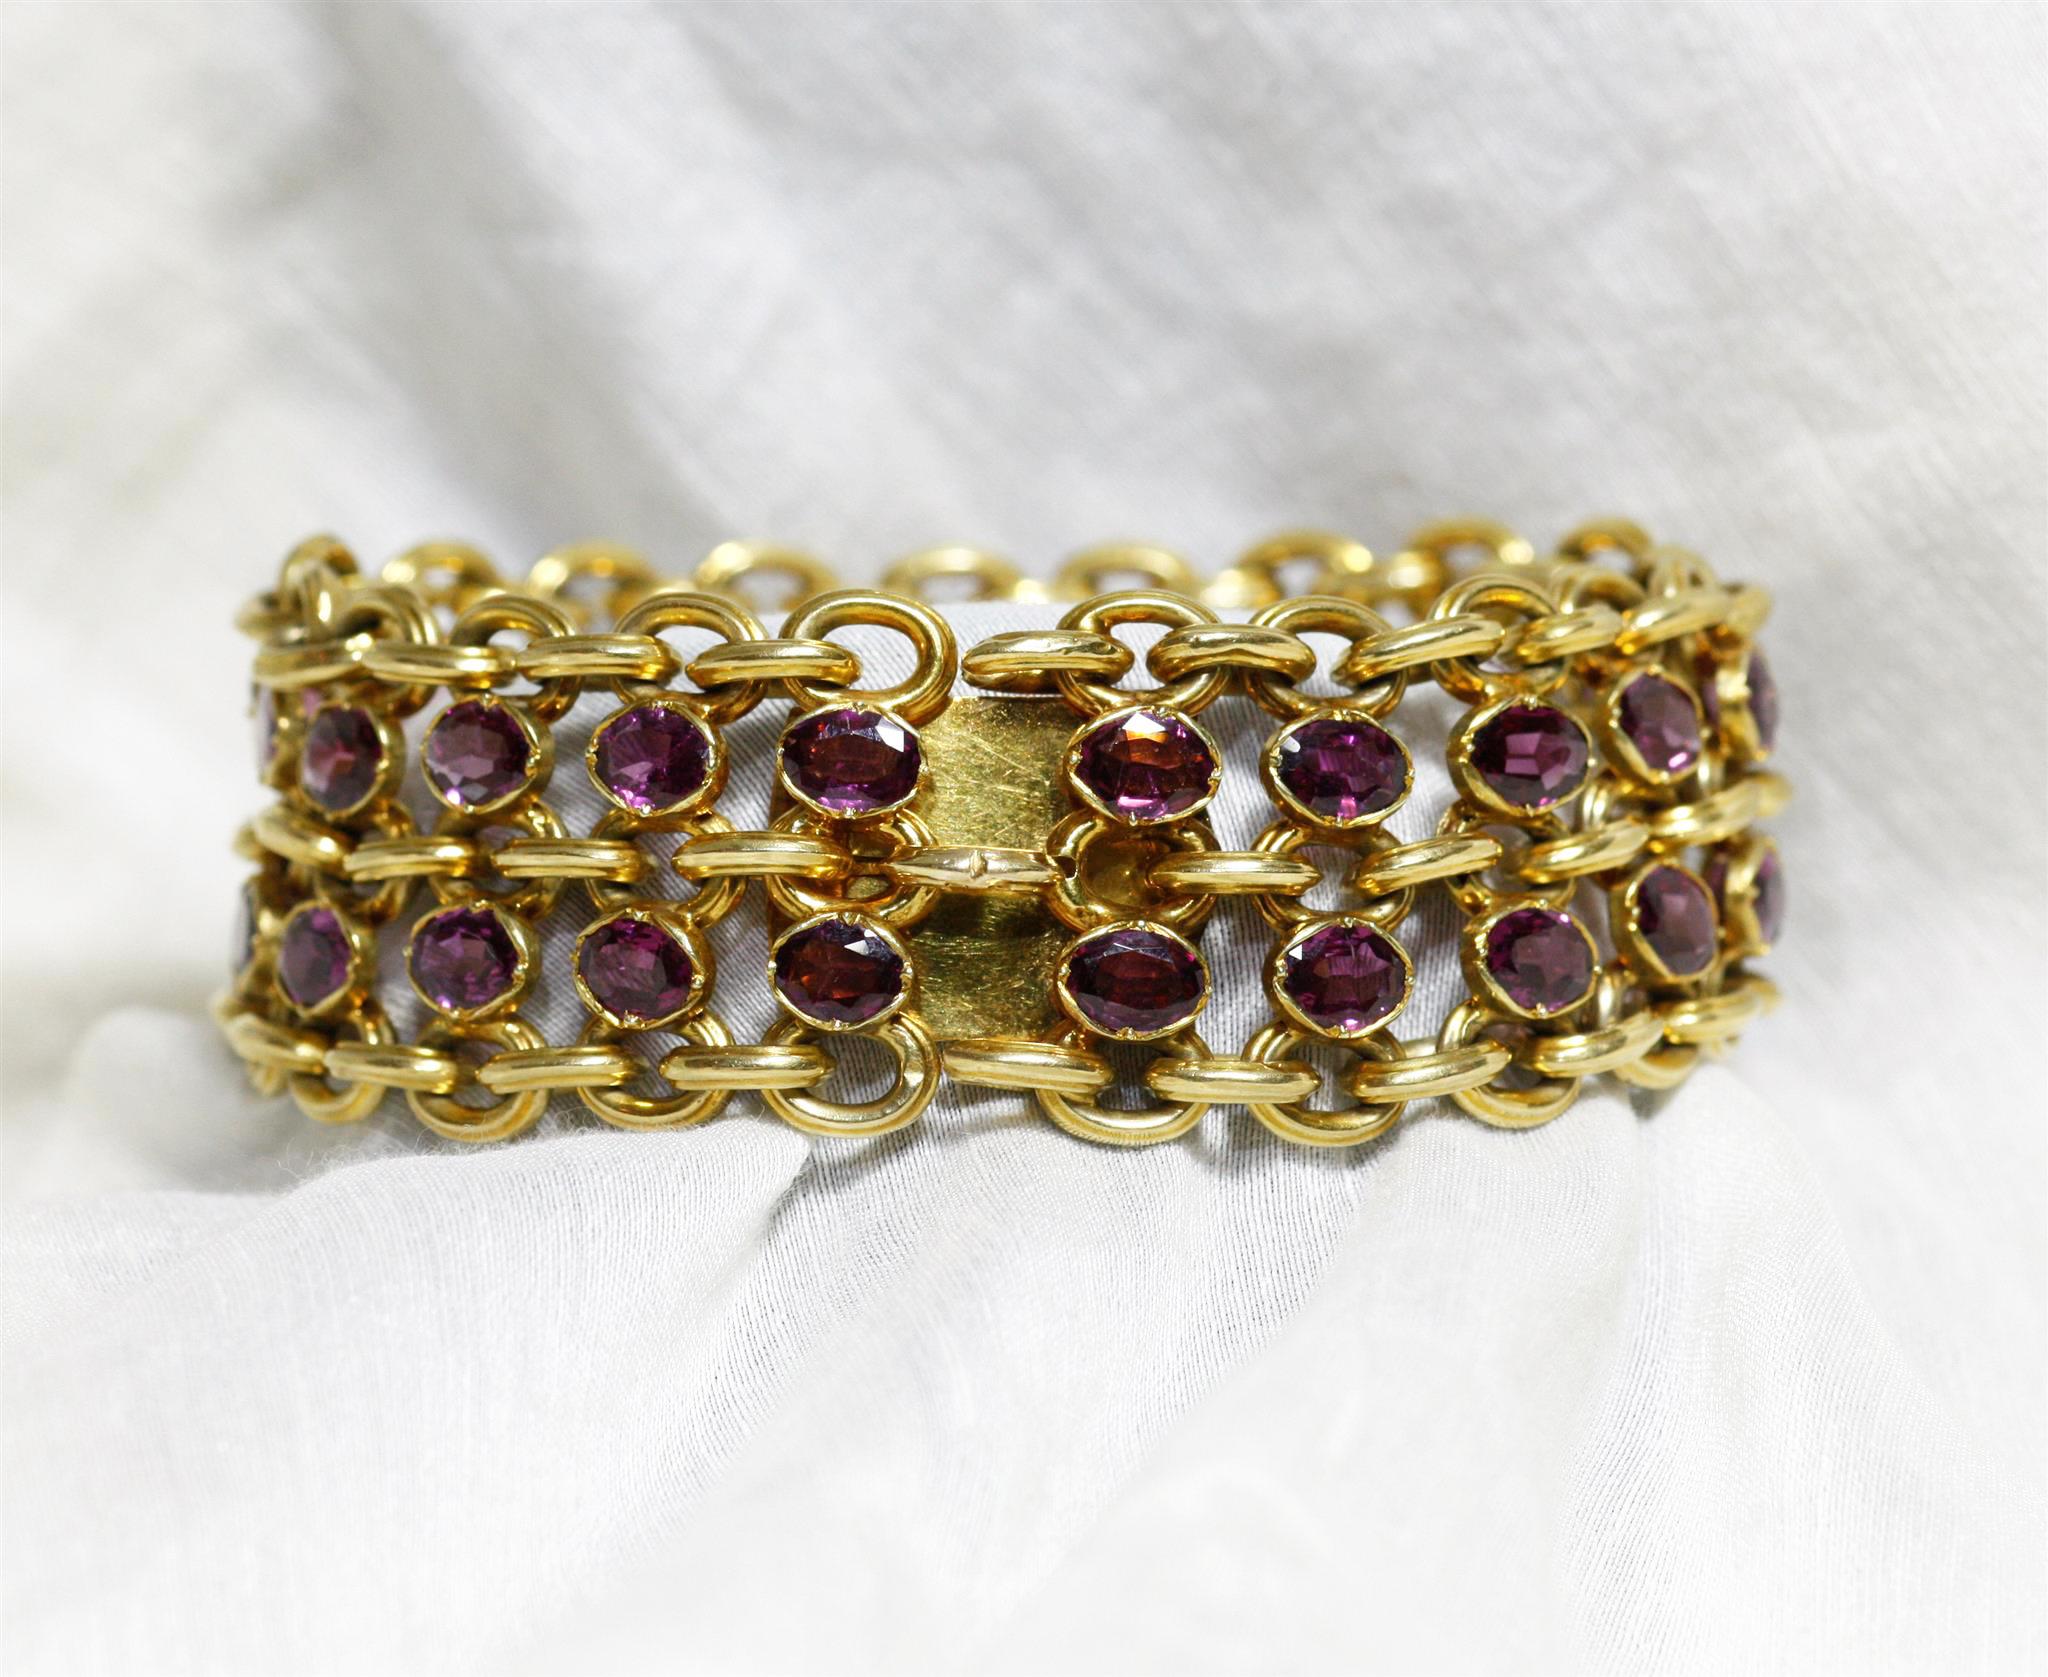 Magnificent 18K gold articulated bracelet set with two lines of almandine garnets. 
Excellent condition.
French work, circa 1860
